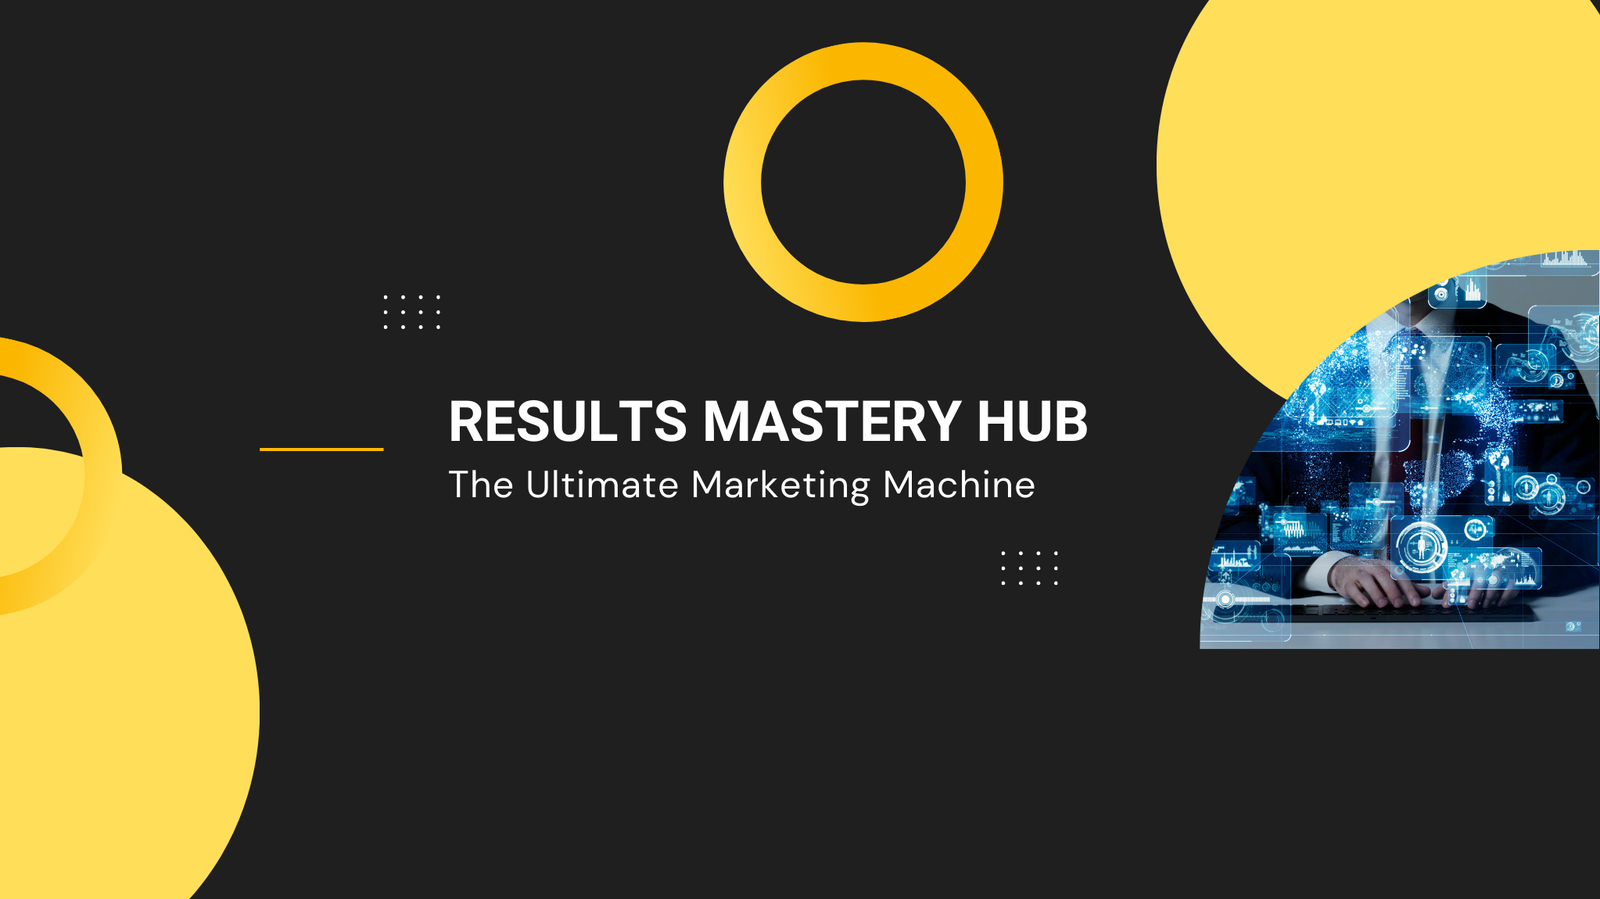 The RESULTS Mastery Hub